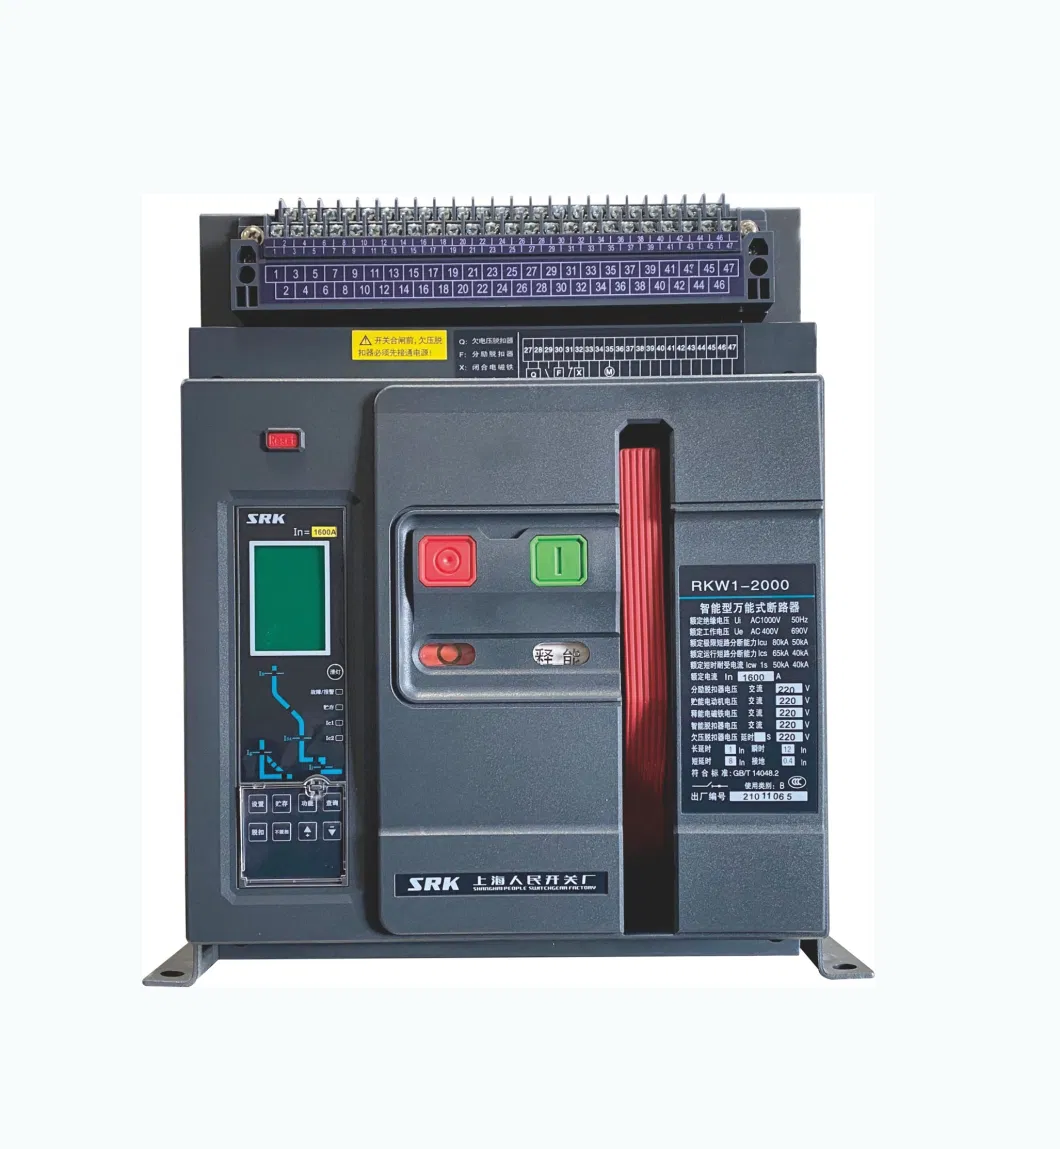 China Top 500 Enterprise Dw45 Rkw1-6300 4p 4000A Fixed Type Intelligent Universal Air Circuit Breaker Acb